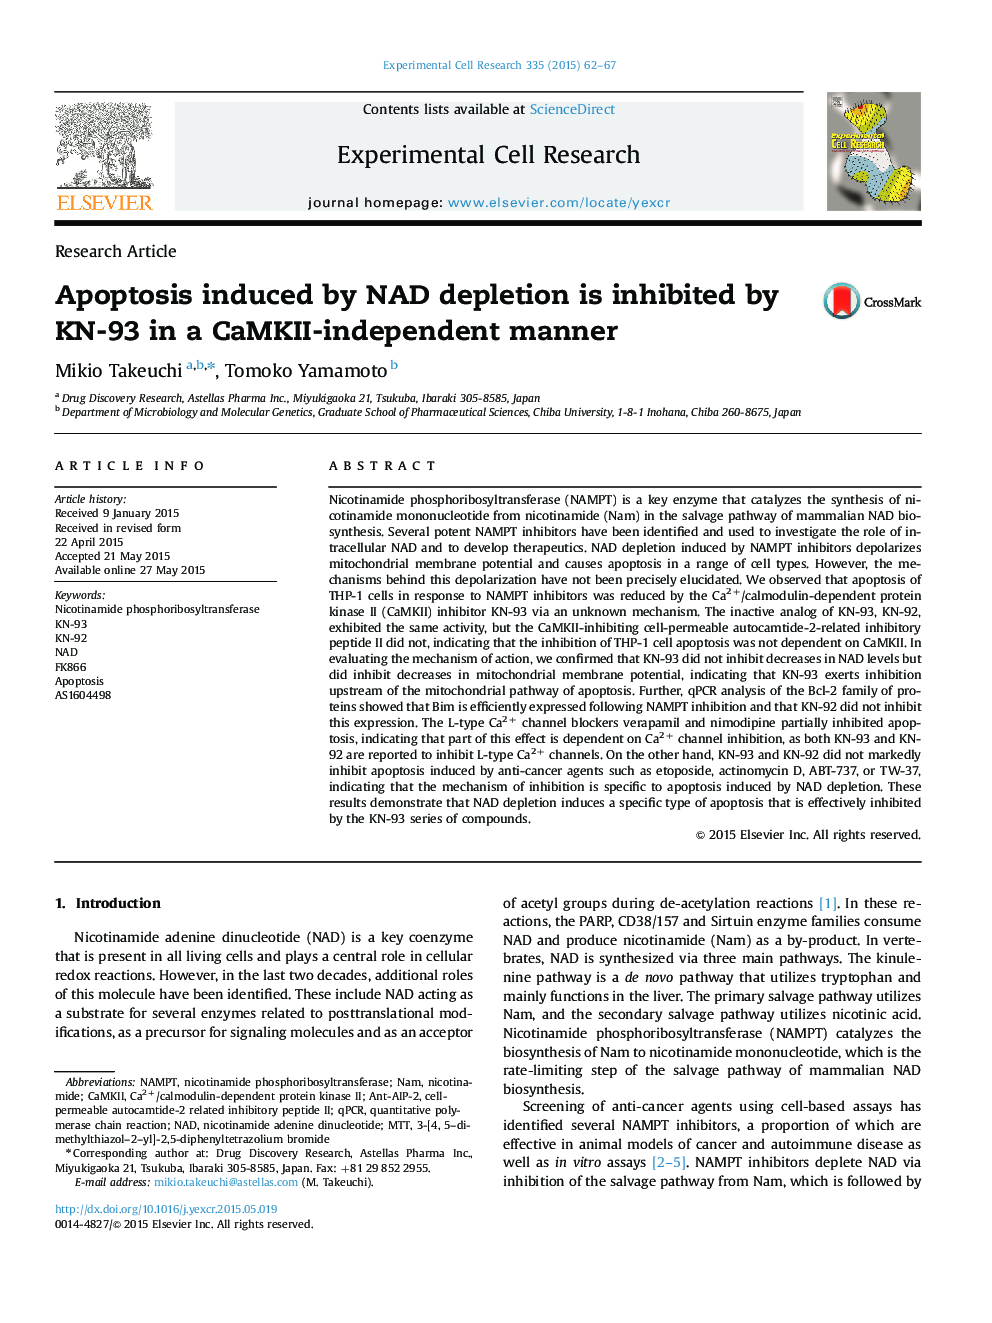 Apoptosis induced by NAD depletion is inhibited by KN-93 in a CaMKII-independent manner